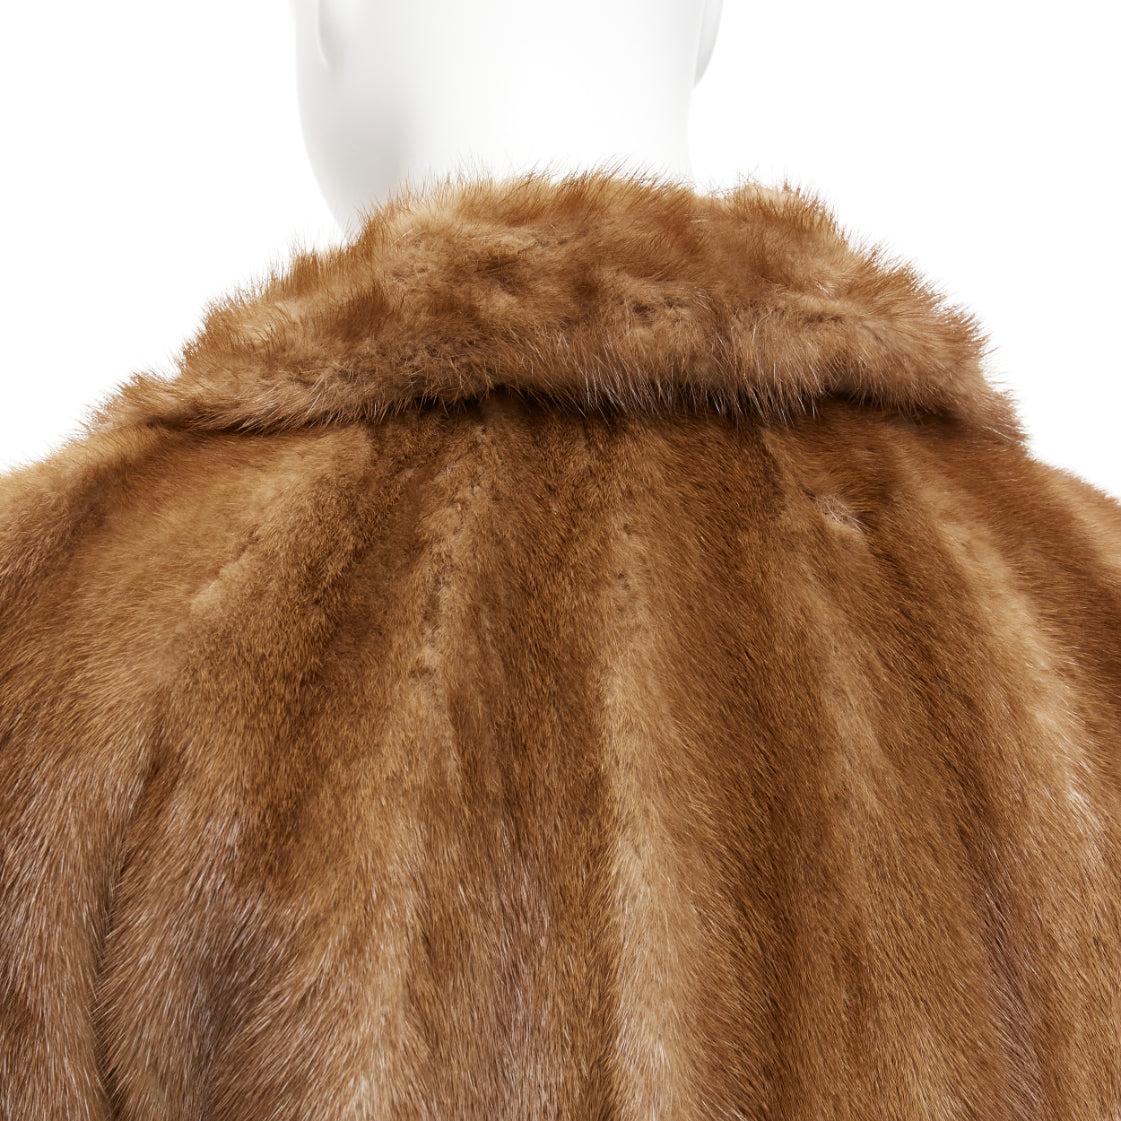 CHOMBERT brown genuine fur patched longline collared long sleeve coat
Reference: JACG/A00157
Brand: Chombert
Material: Fur
Color: Brown
Pattern: Solid
Closure: Button
Lining: Brown Fabric

CONDITION:
Condition: Very good, this item was pre-owned and